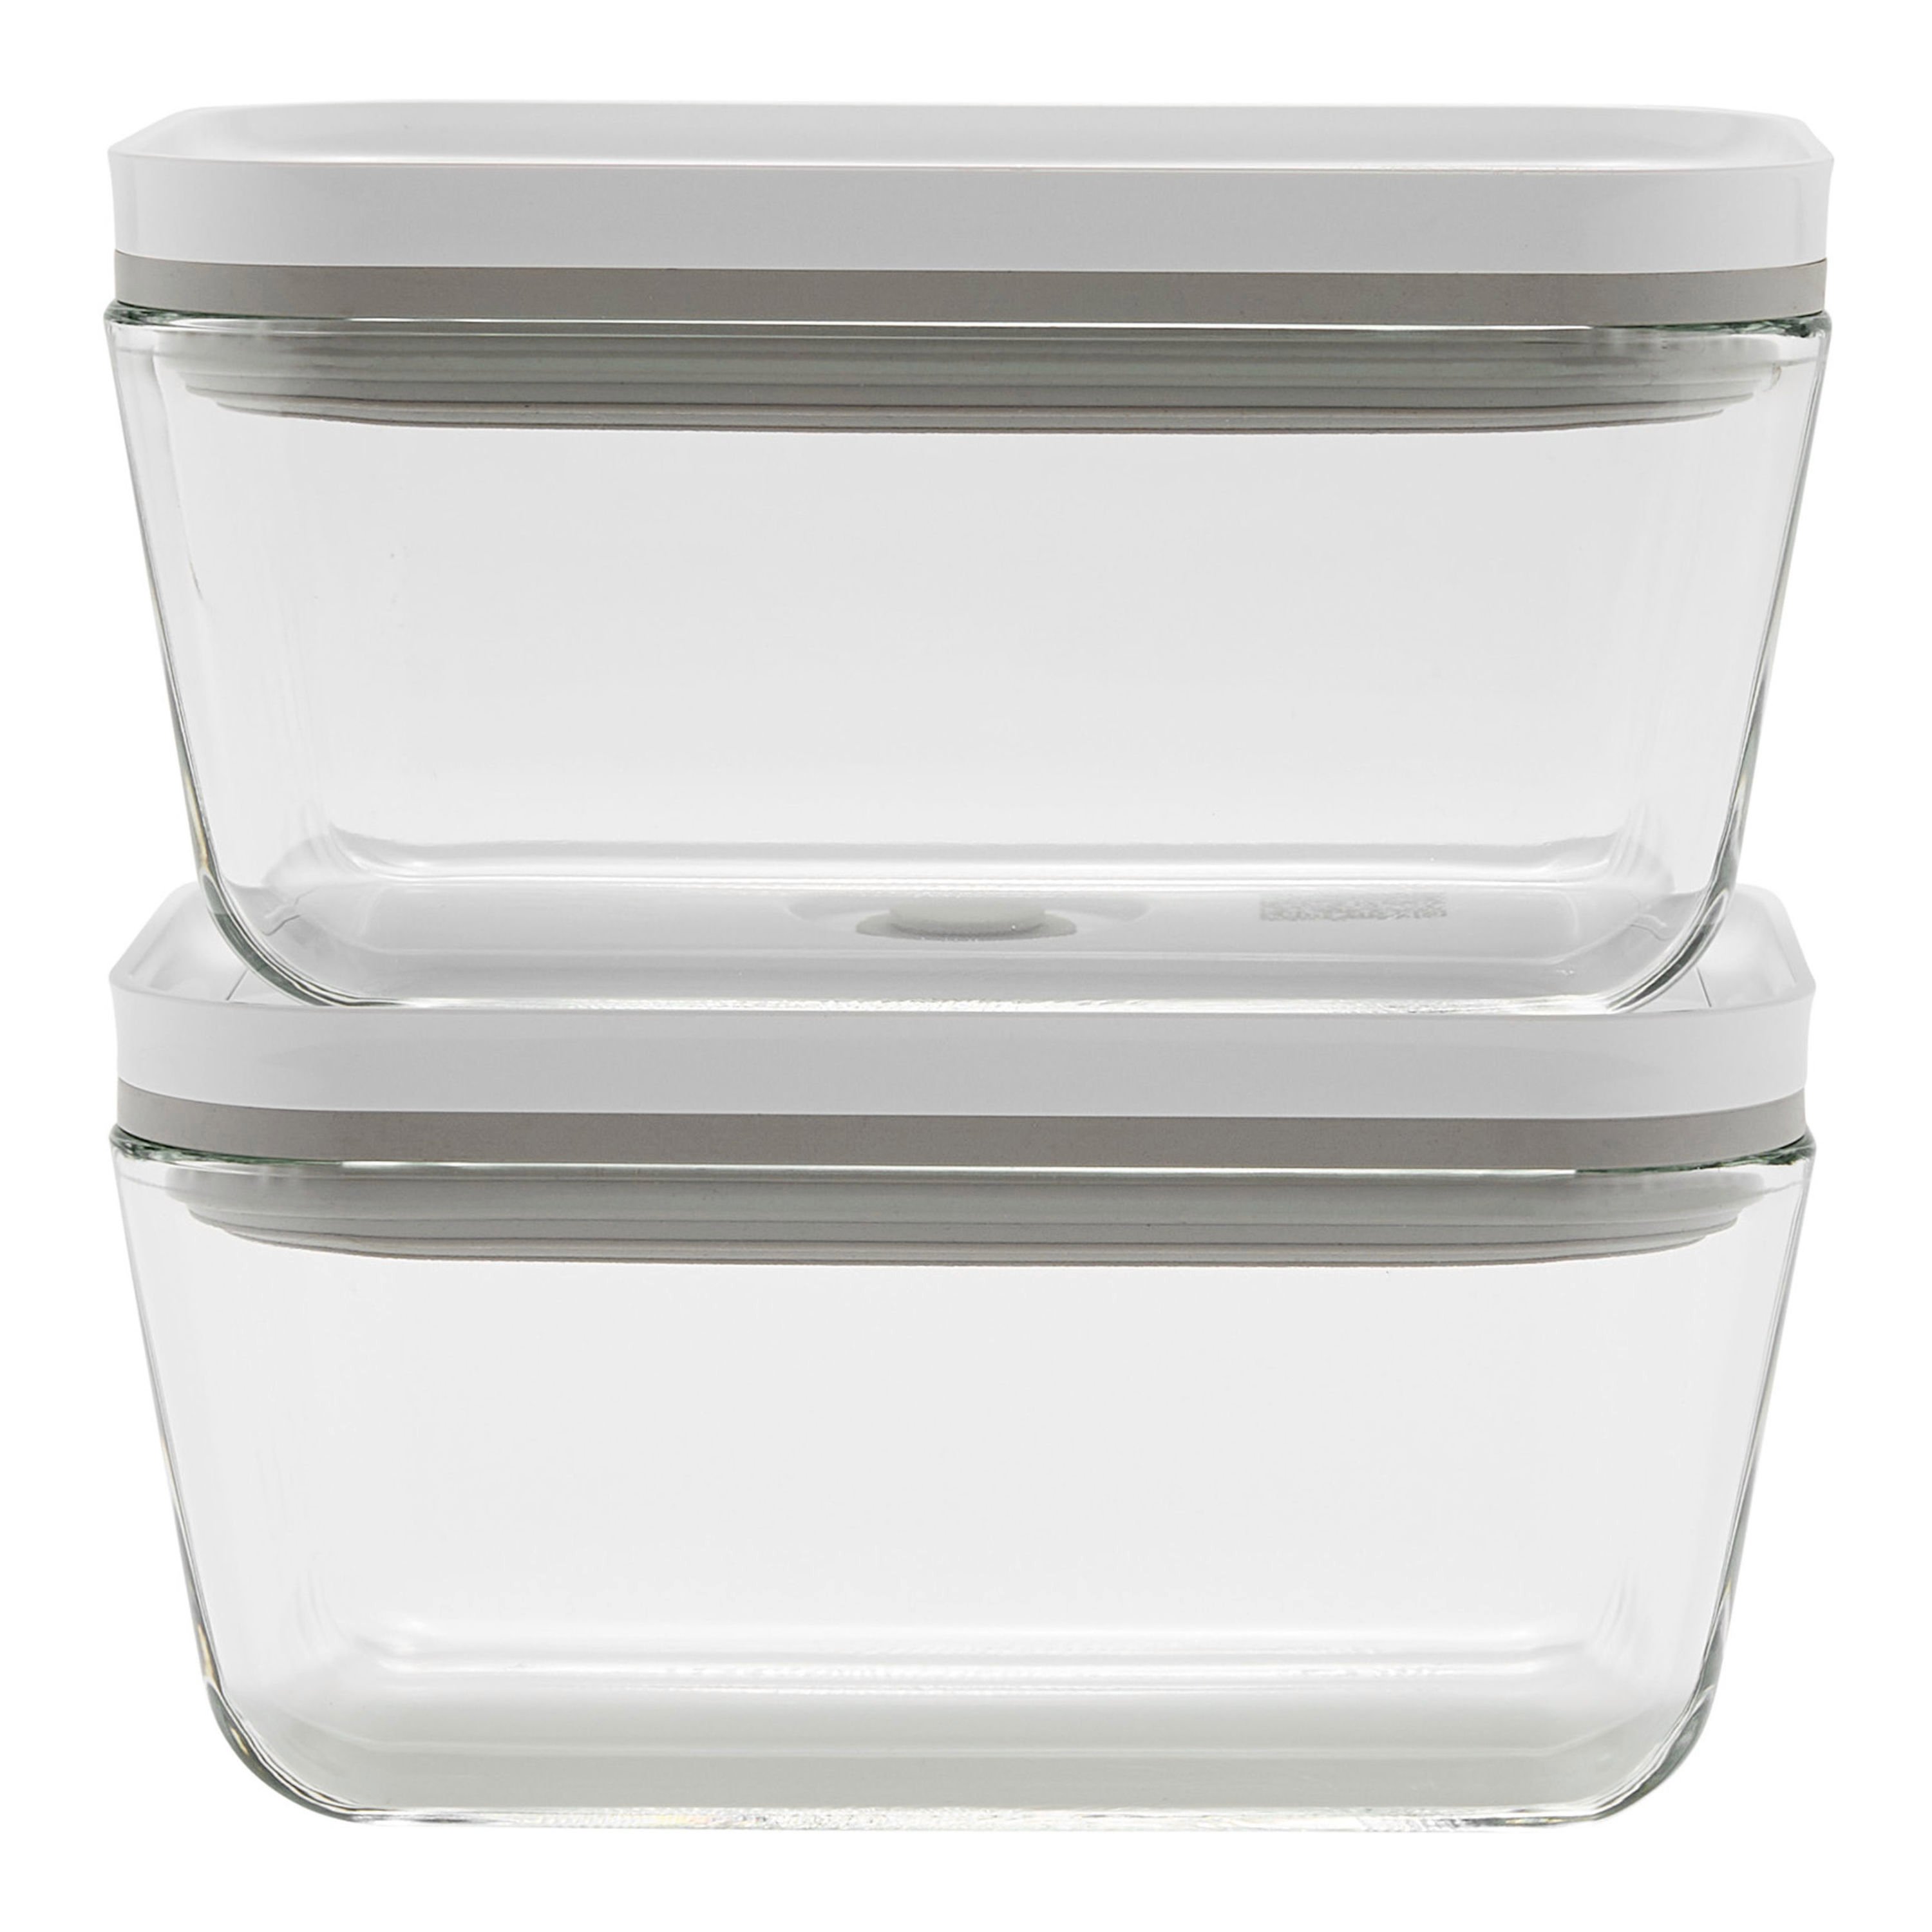 Plastic Food Storage Containers w/attached Lids. Multi sizes Containers.  Microwave/Freezer & Dishwasher Safe - Steam Release Valve. BPA/Free (10 pcs)